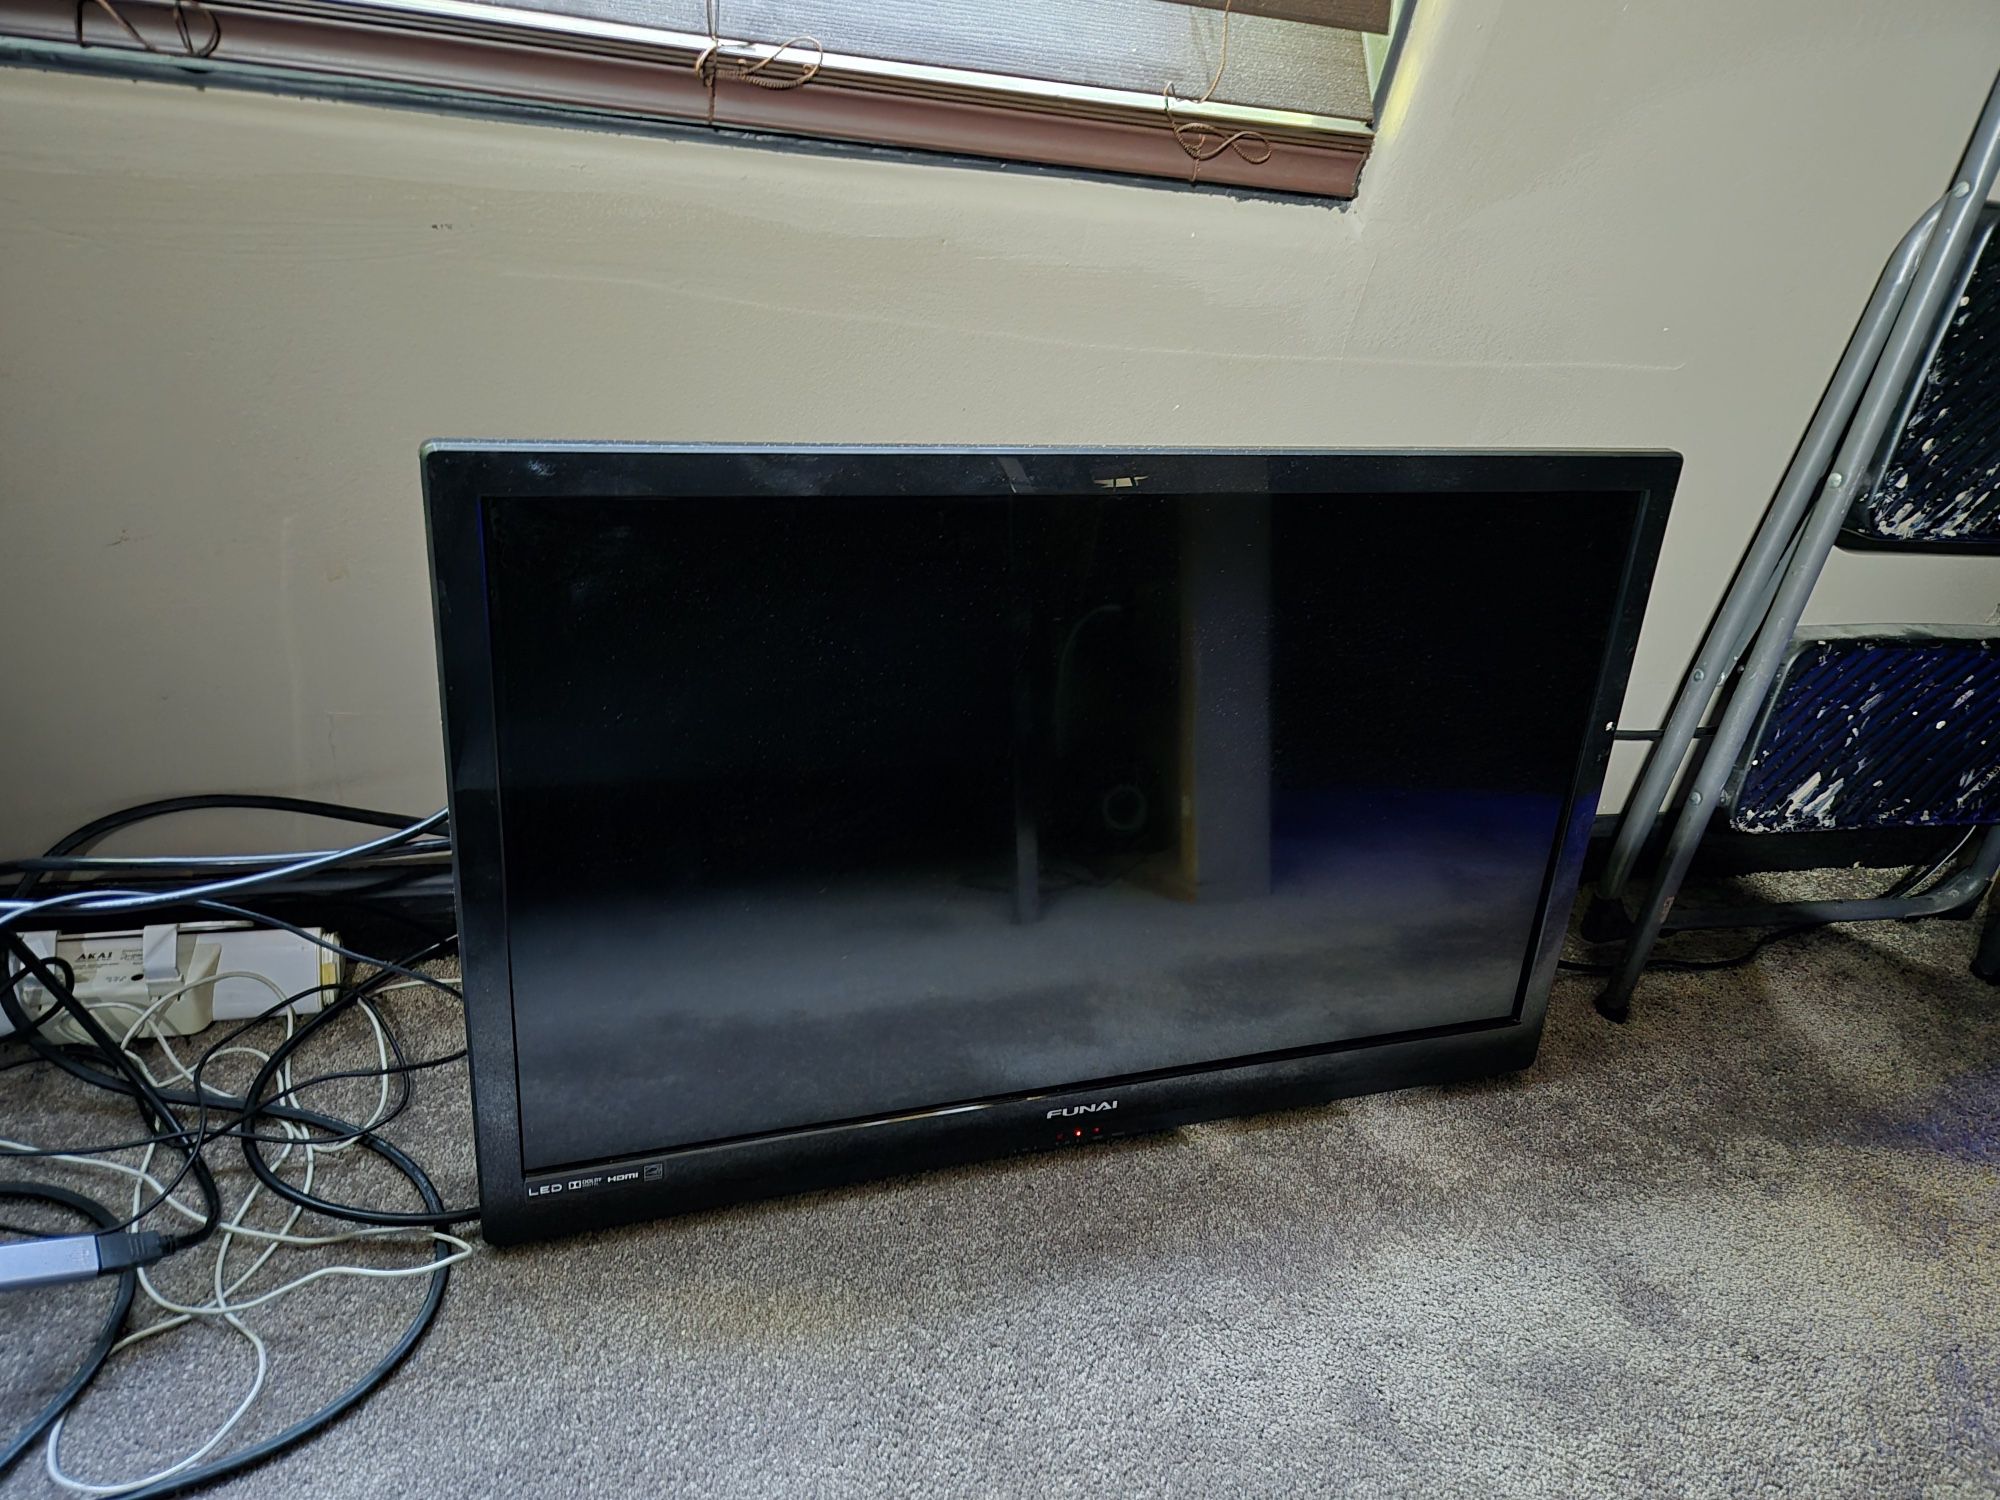 Scepter 40 Inch Monitor Tv With Remote 